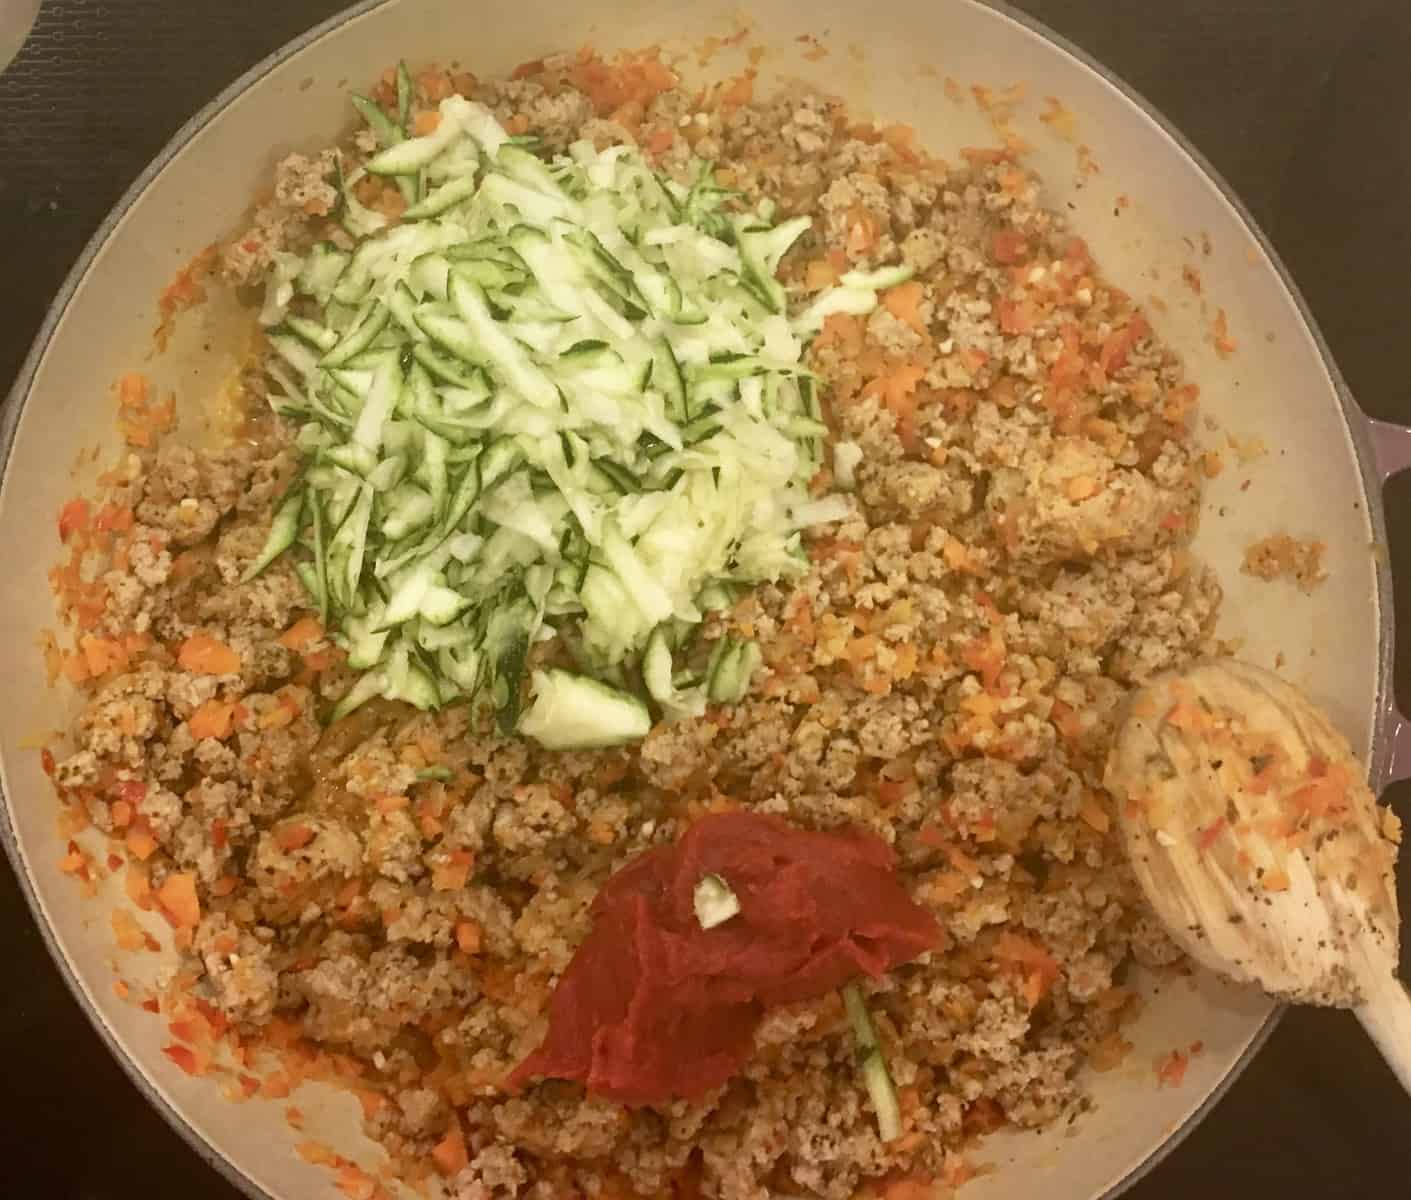 Shredded zucchini and tomato paste in the meat sauce. 